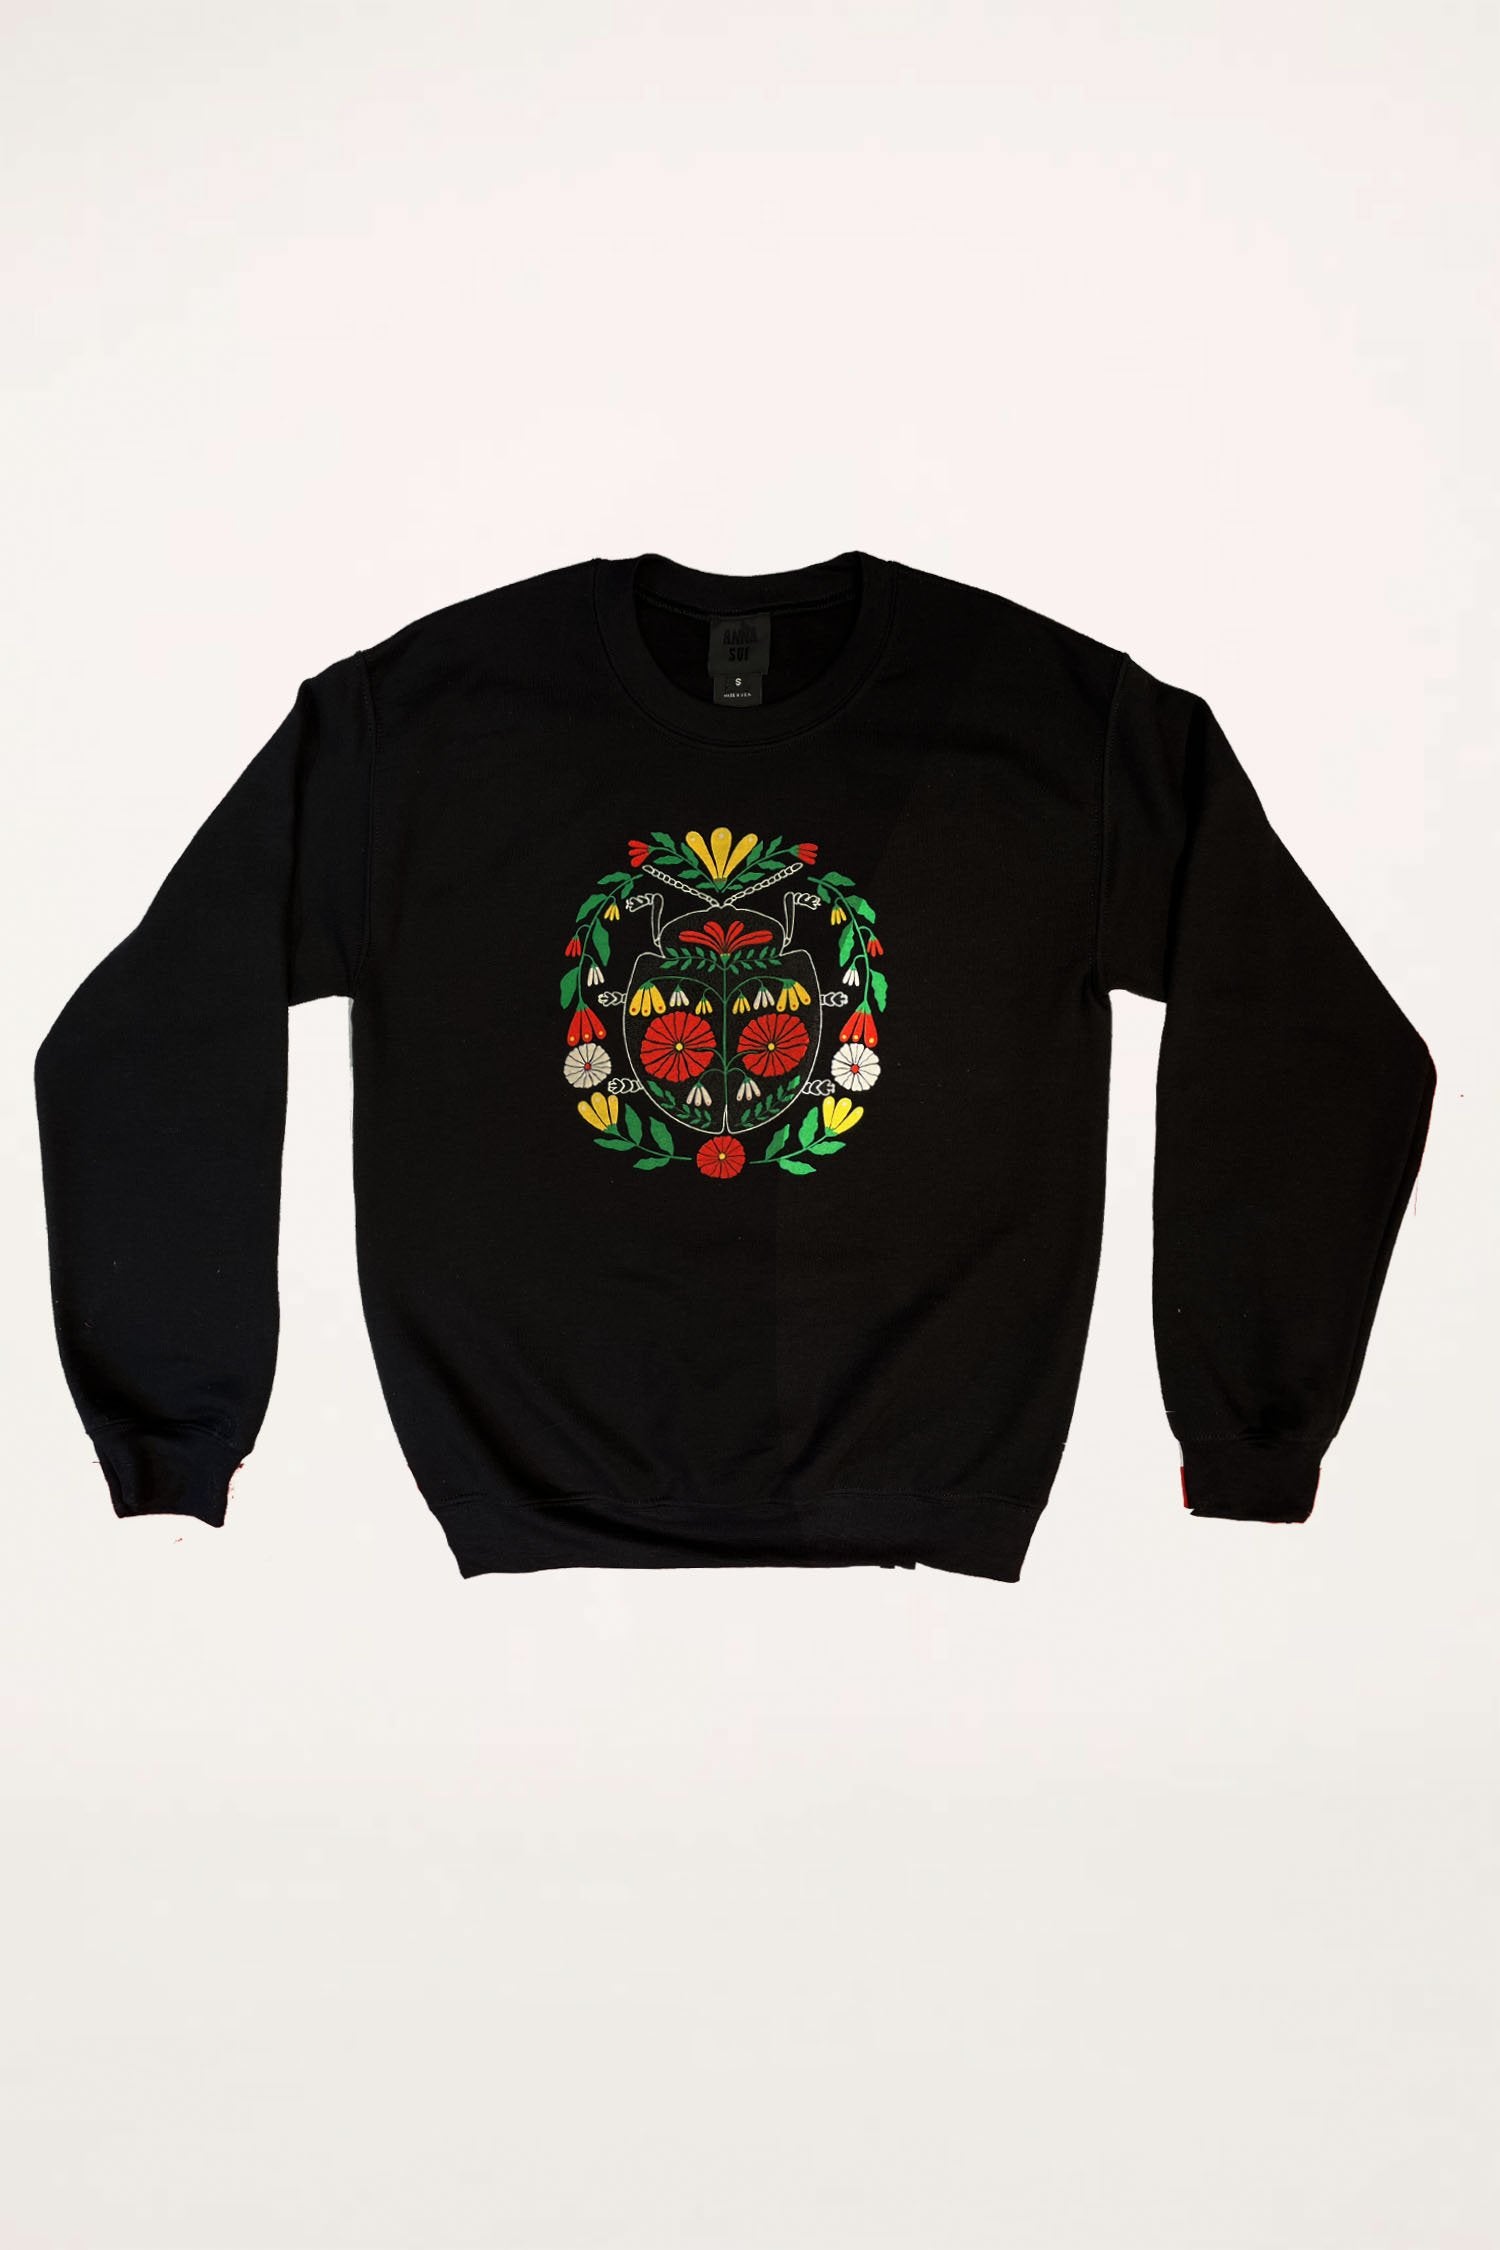 Beetle Sweatshirt Red, is black long sleeves, a large round floral design in red and green at center 